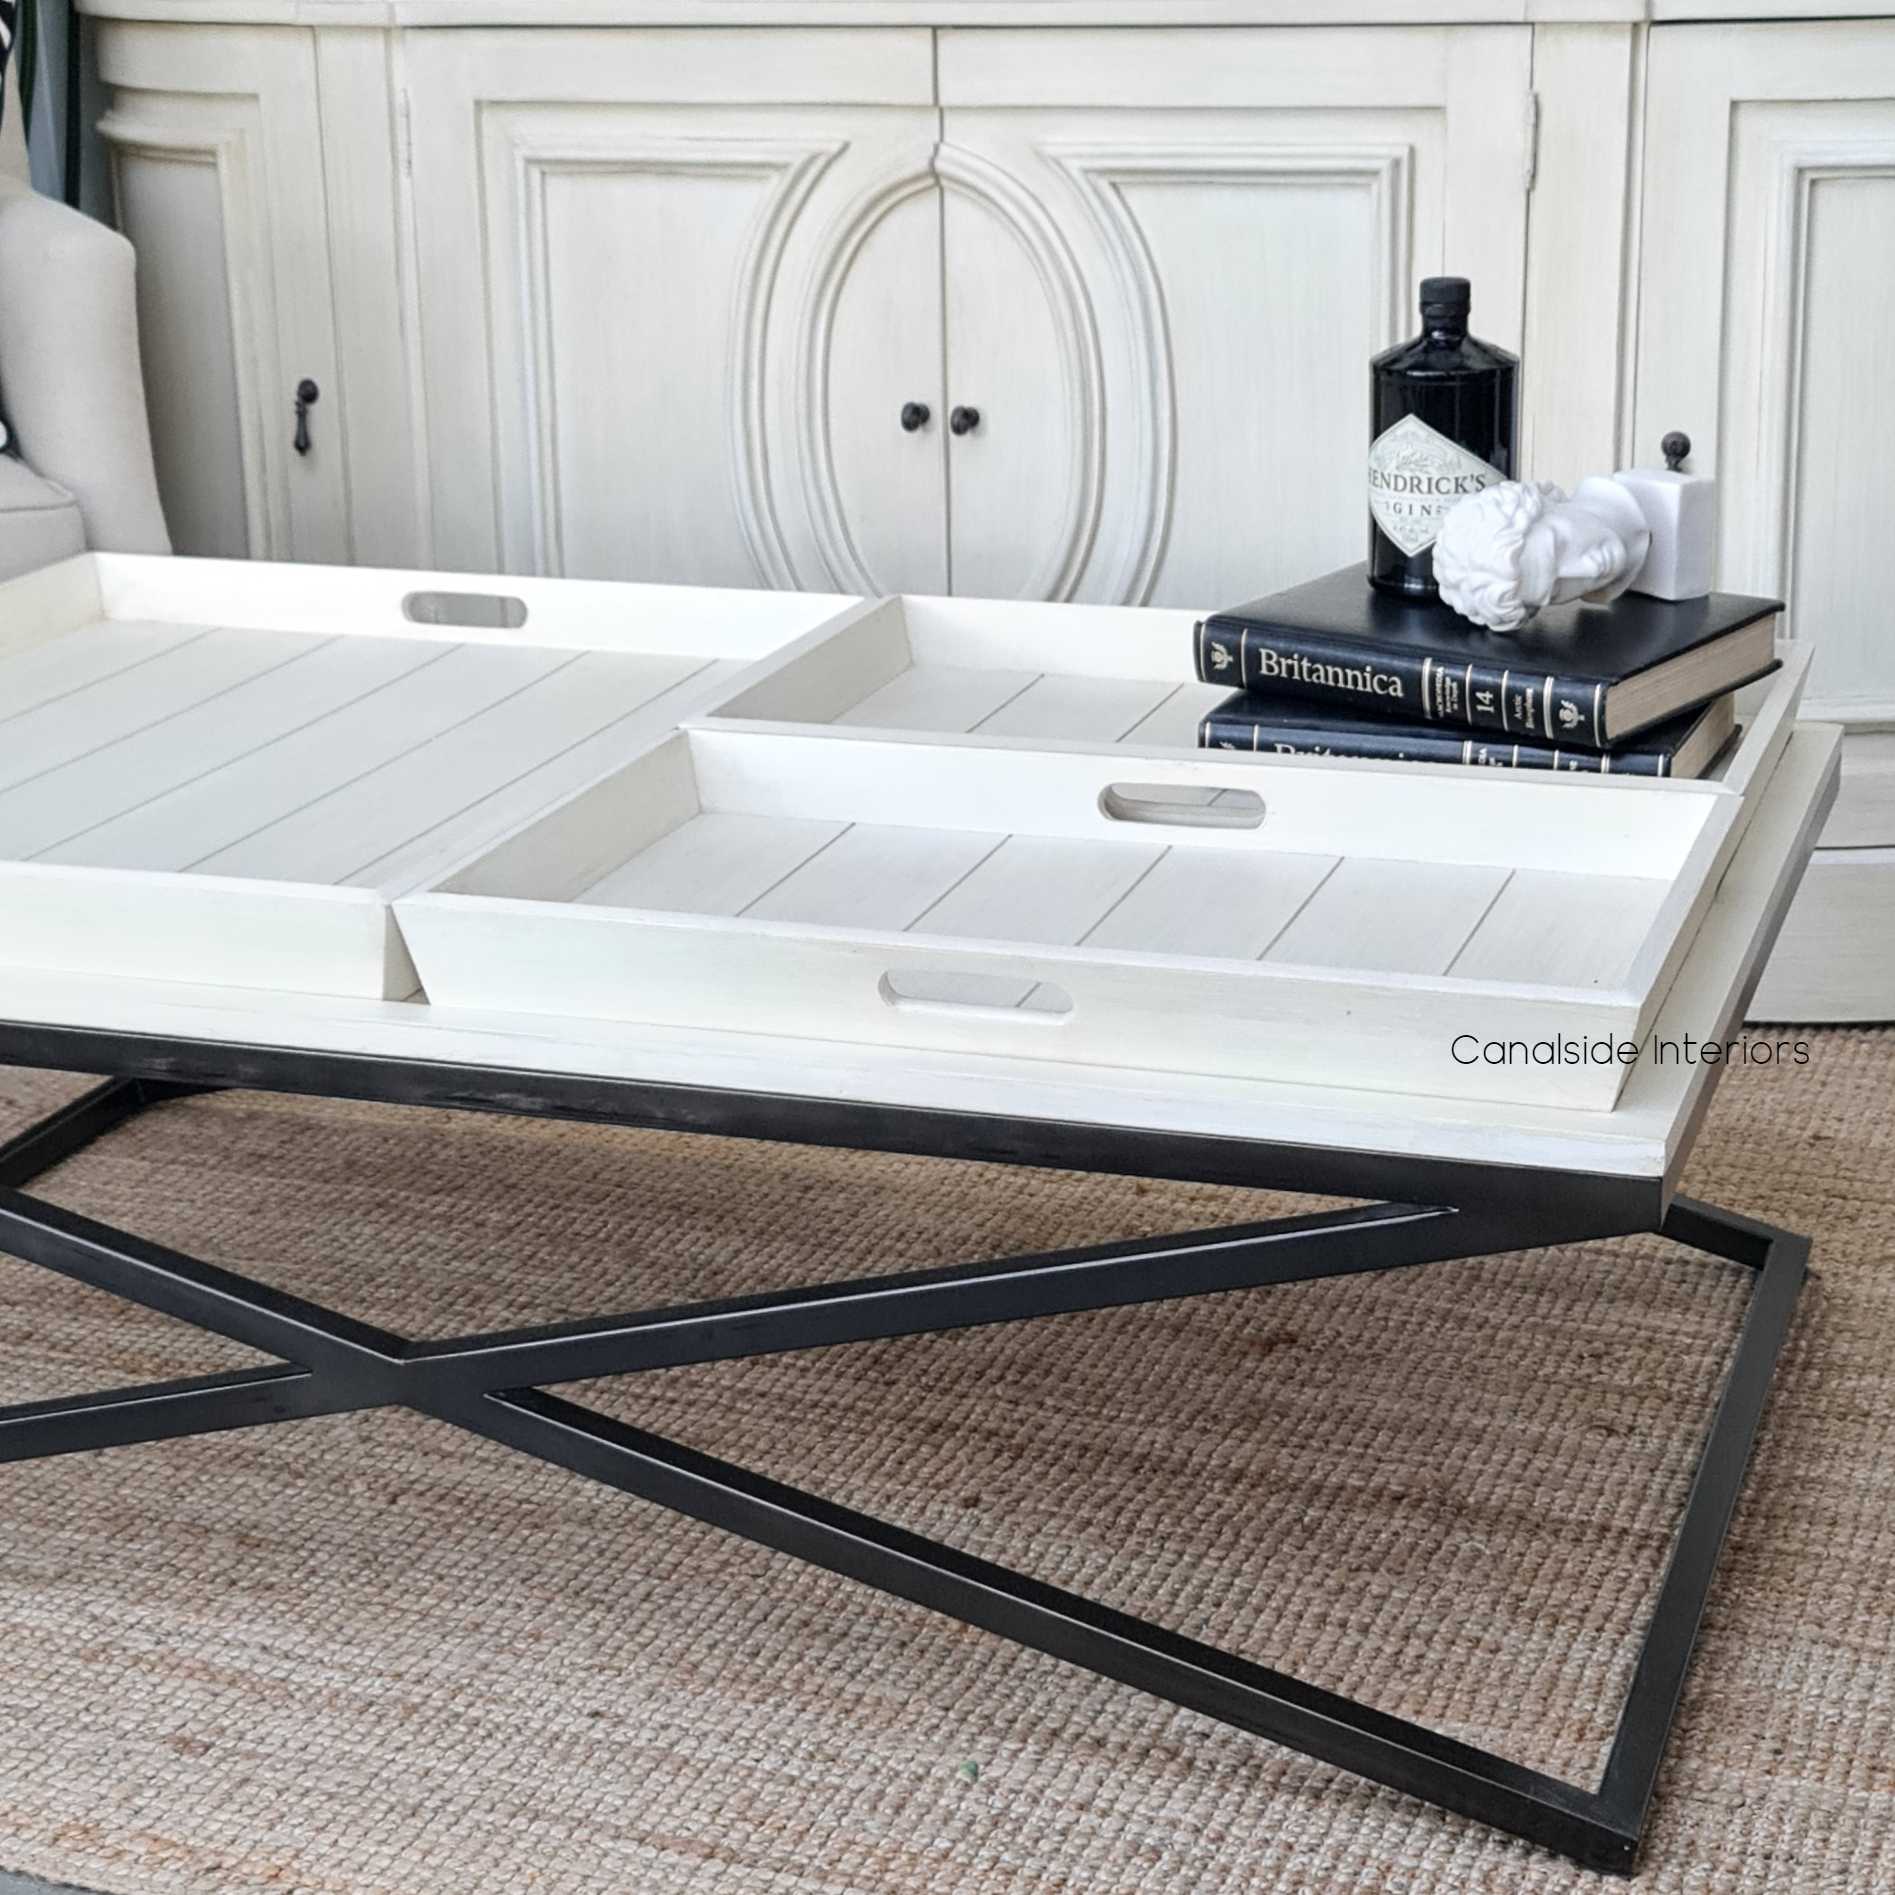 Baxter Rectangular Coffee Table with 3 Removable Butler Trays, Coffee Tables, Hamptons, Living Room, Lounge Room, Family Room, Criss Cross, Livingroom, Family Room, Lounge Room, loungeroom, familyroom, coffeetable